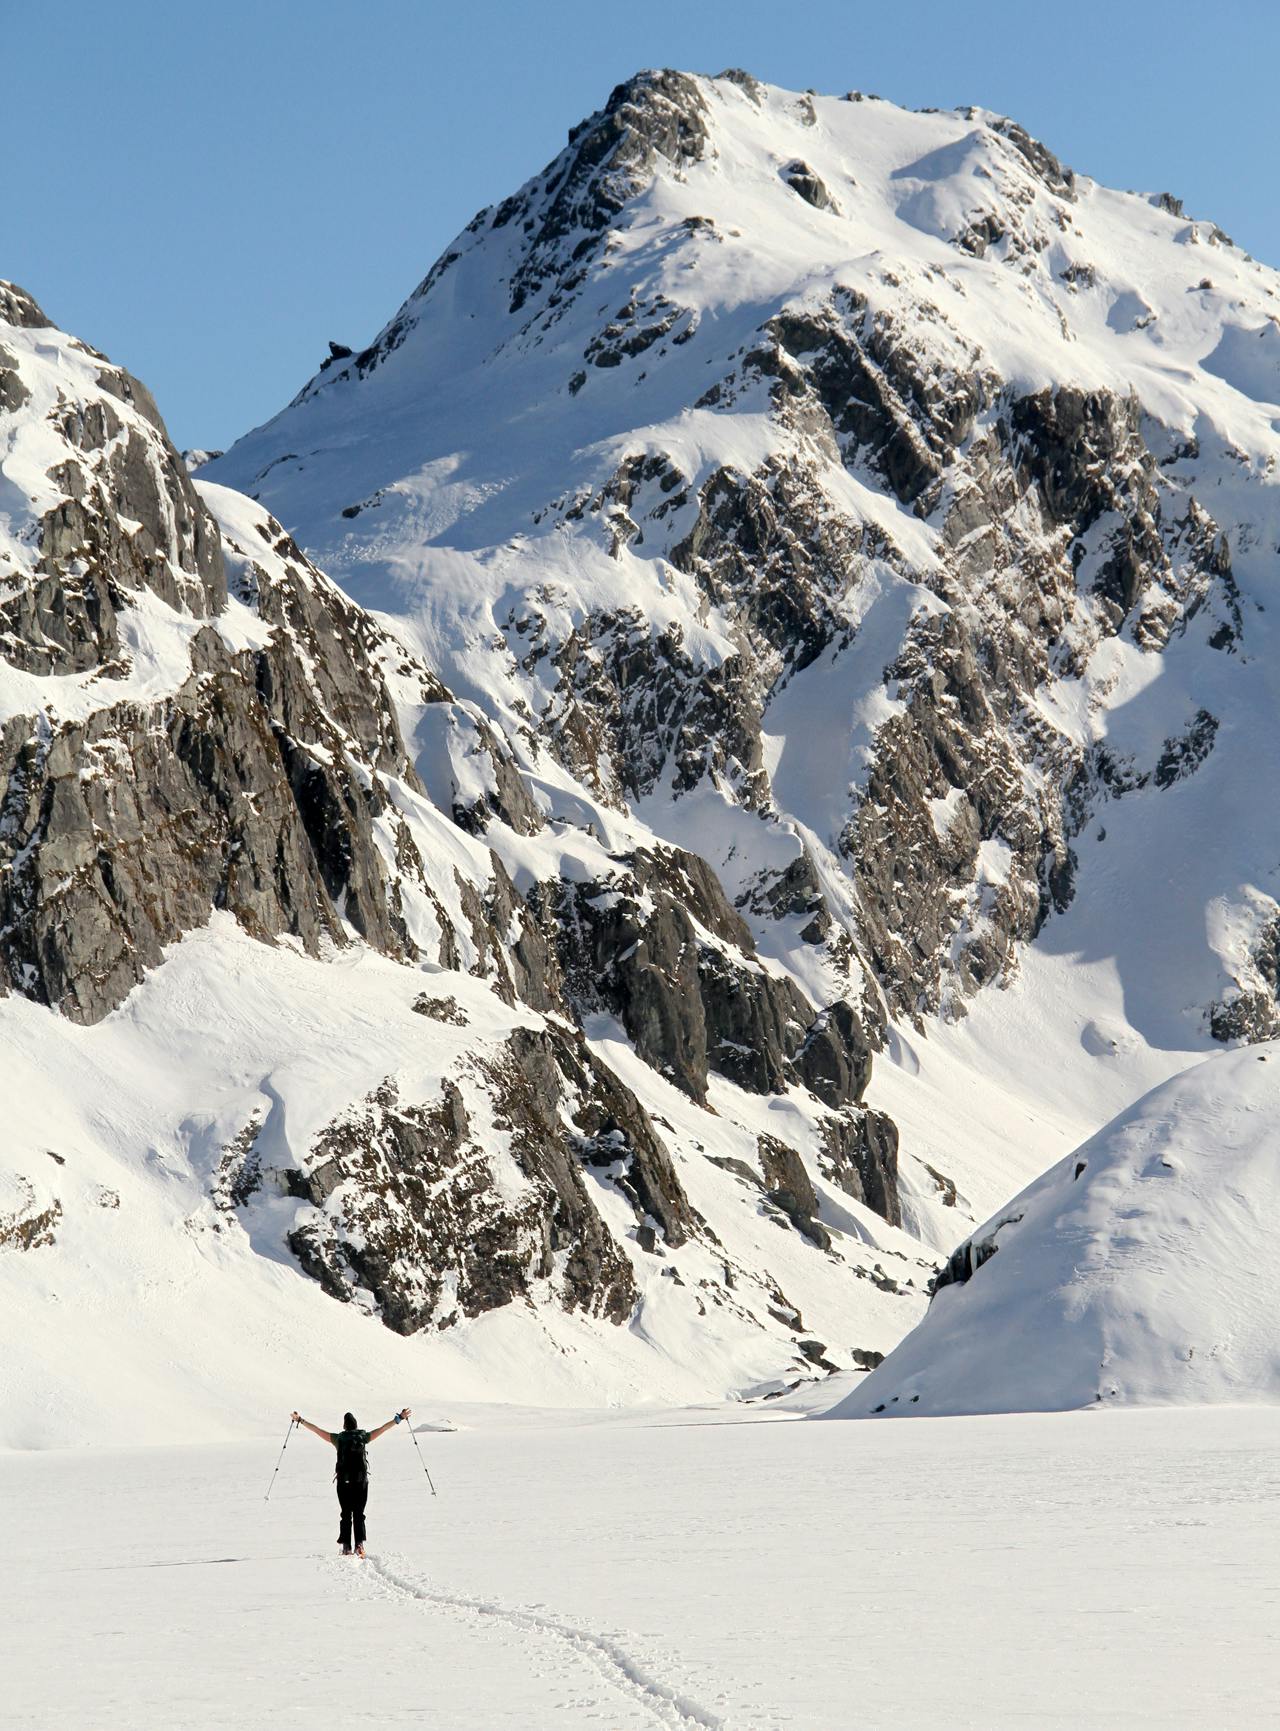 Winter on the Routeburn provides plenty of skiing opportunities and unwinding in the cosy - and empty - huts